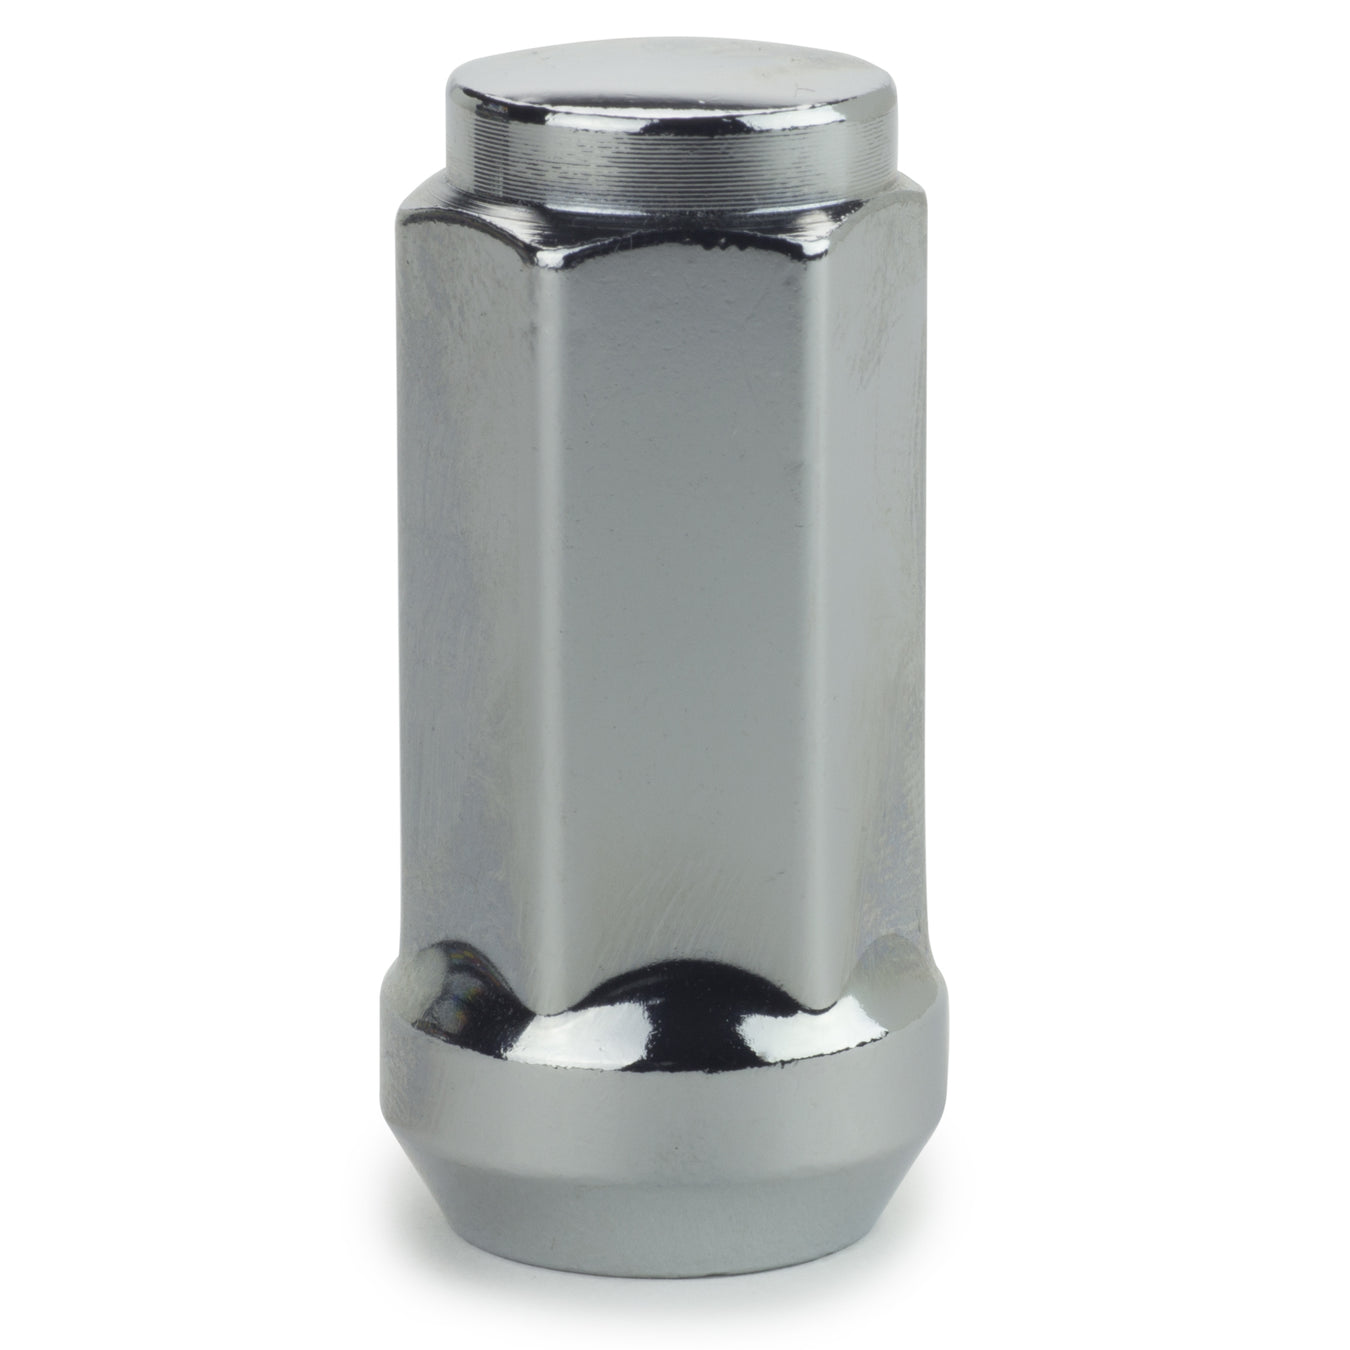 BLACK Spike Chrome Nut Cover 1 1/16 Hex Nut with Flange – Buy